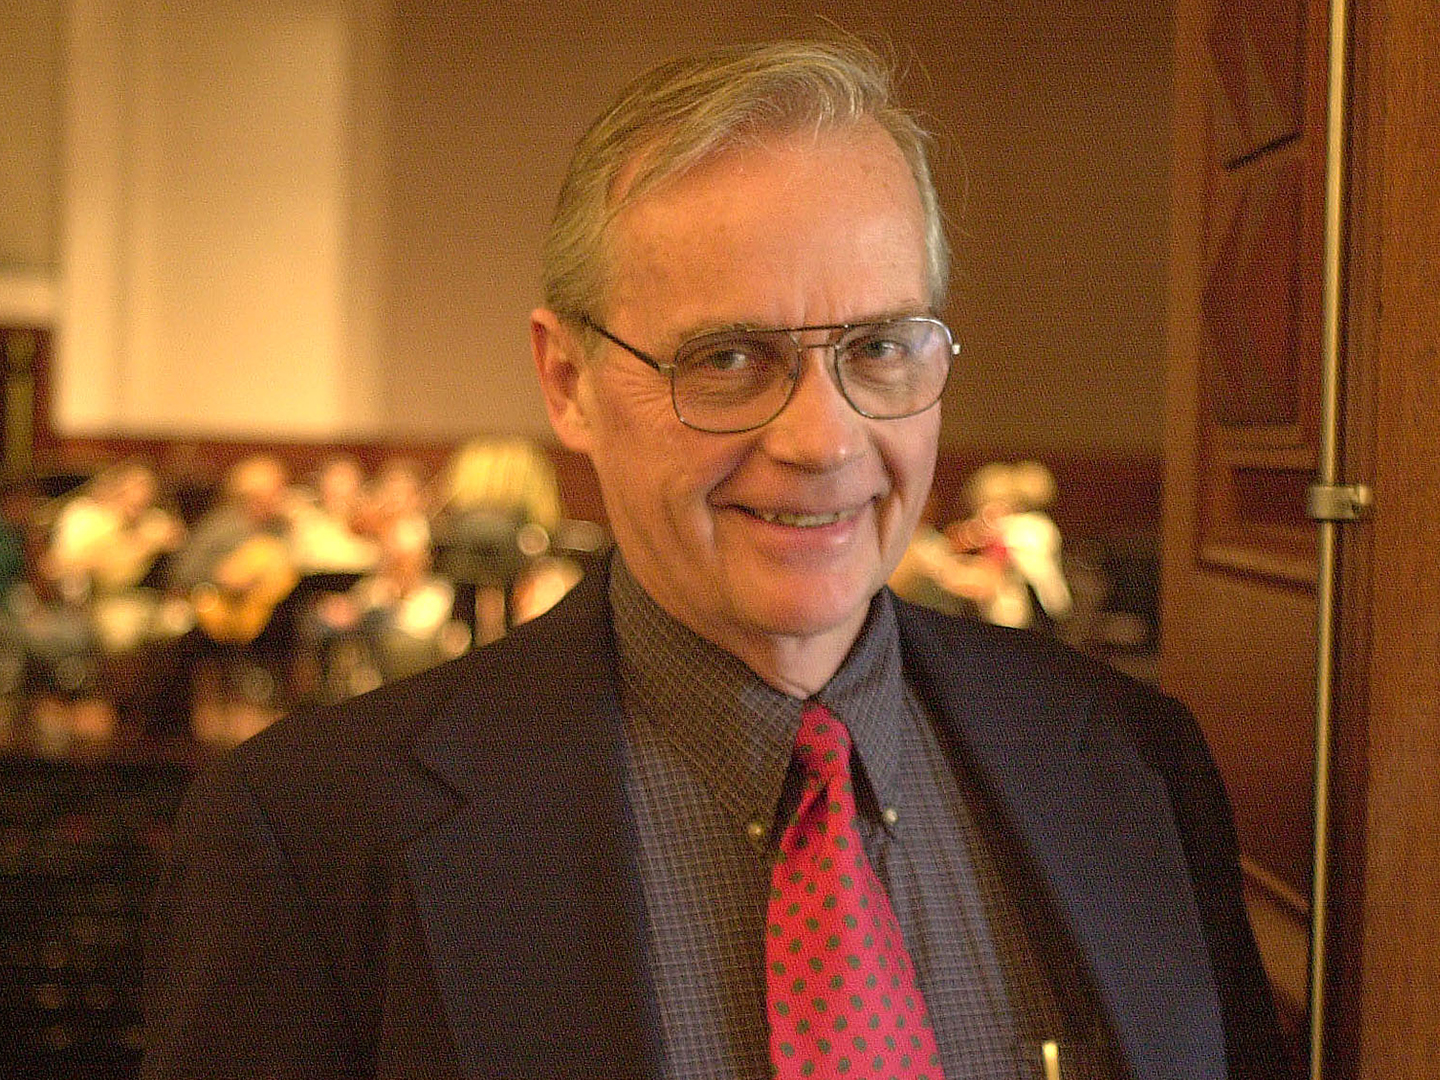 Photo of composer and teacher Rick Lesemann wearing a suit and tie and smiling at the camera.